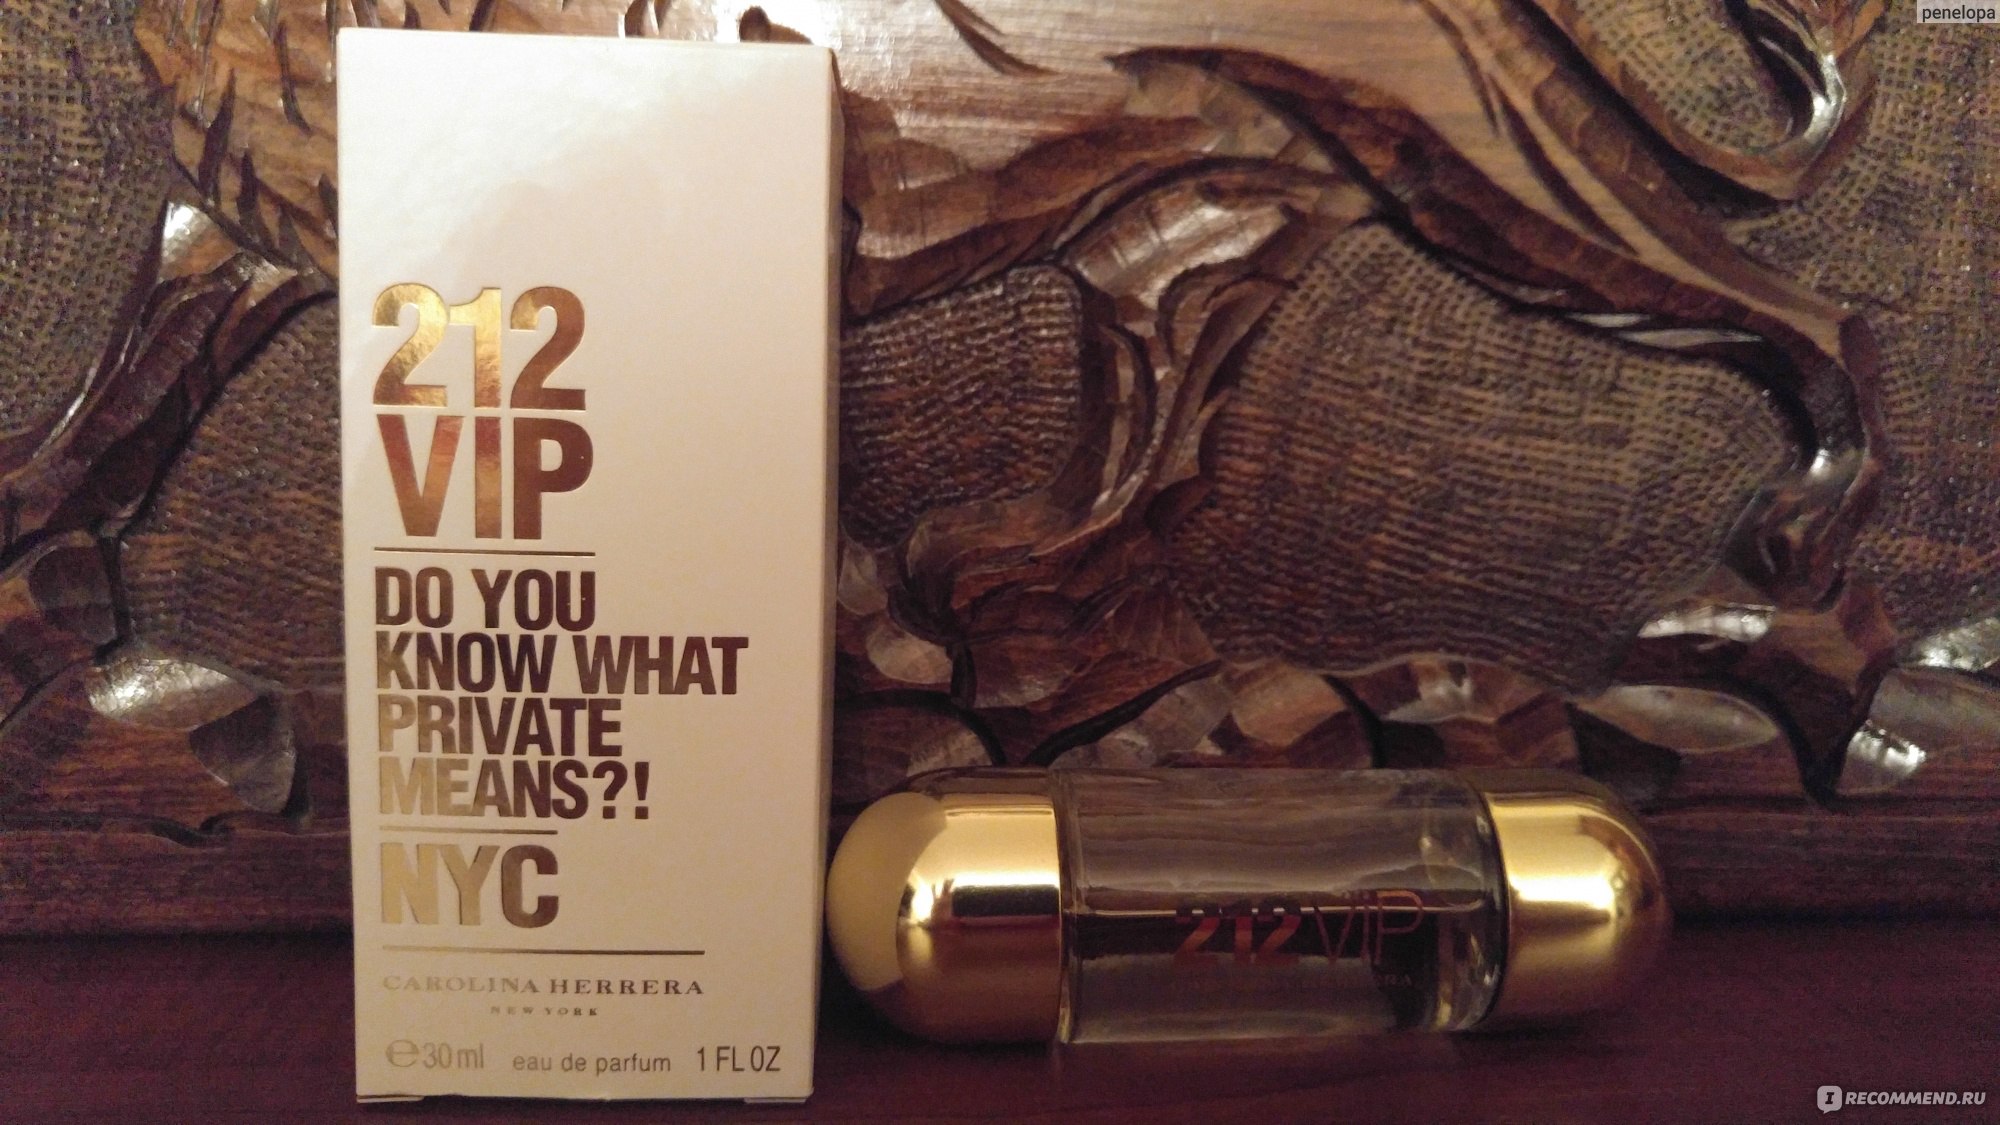 Private meaning. 212 VIP do you know what private. Парфюм 212 VIP do you know what private means NYC 80 мл. Carolina Herrera 212 VIP - do not know what private. Do you know what private means 212 VIP.